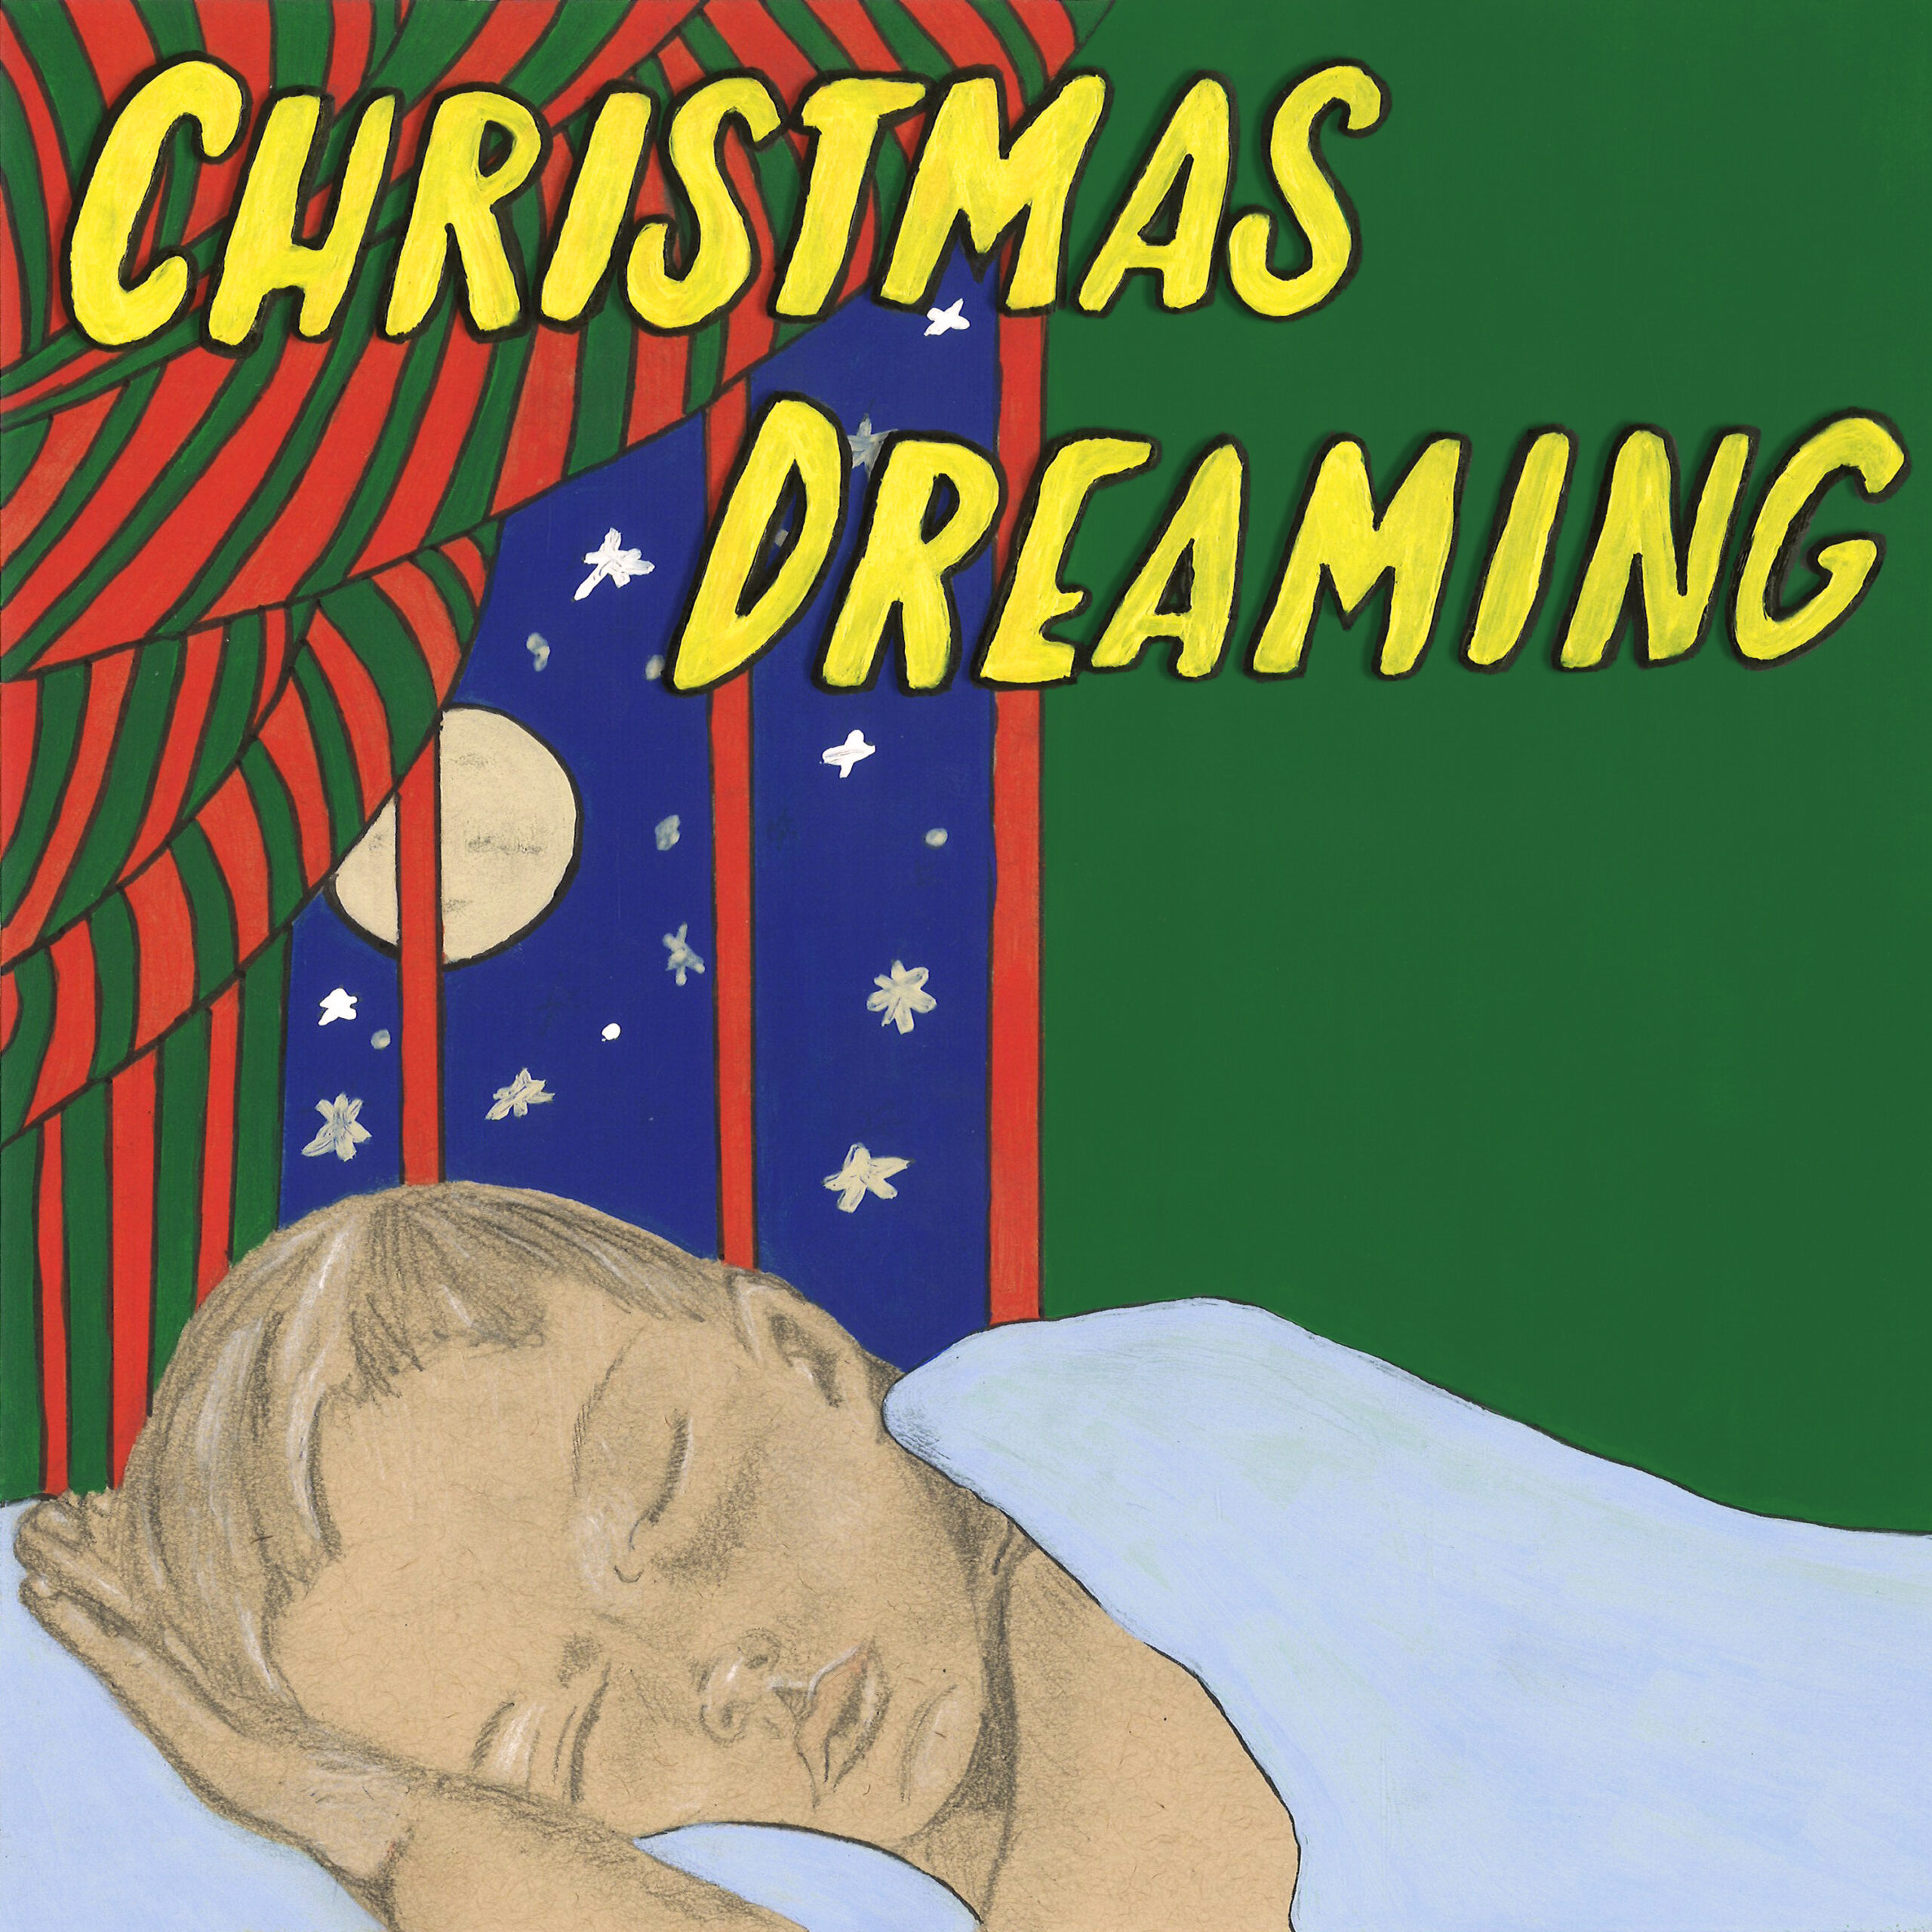 Christmas Dreaming Cover Cover FINAL copy